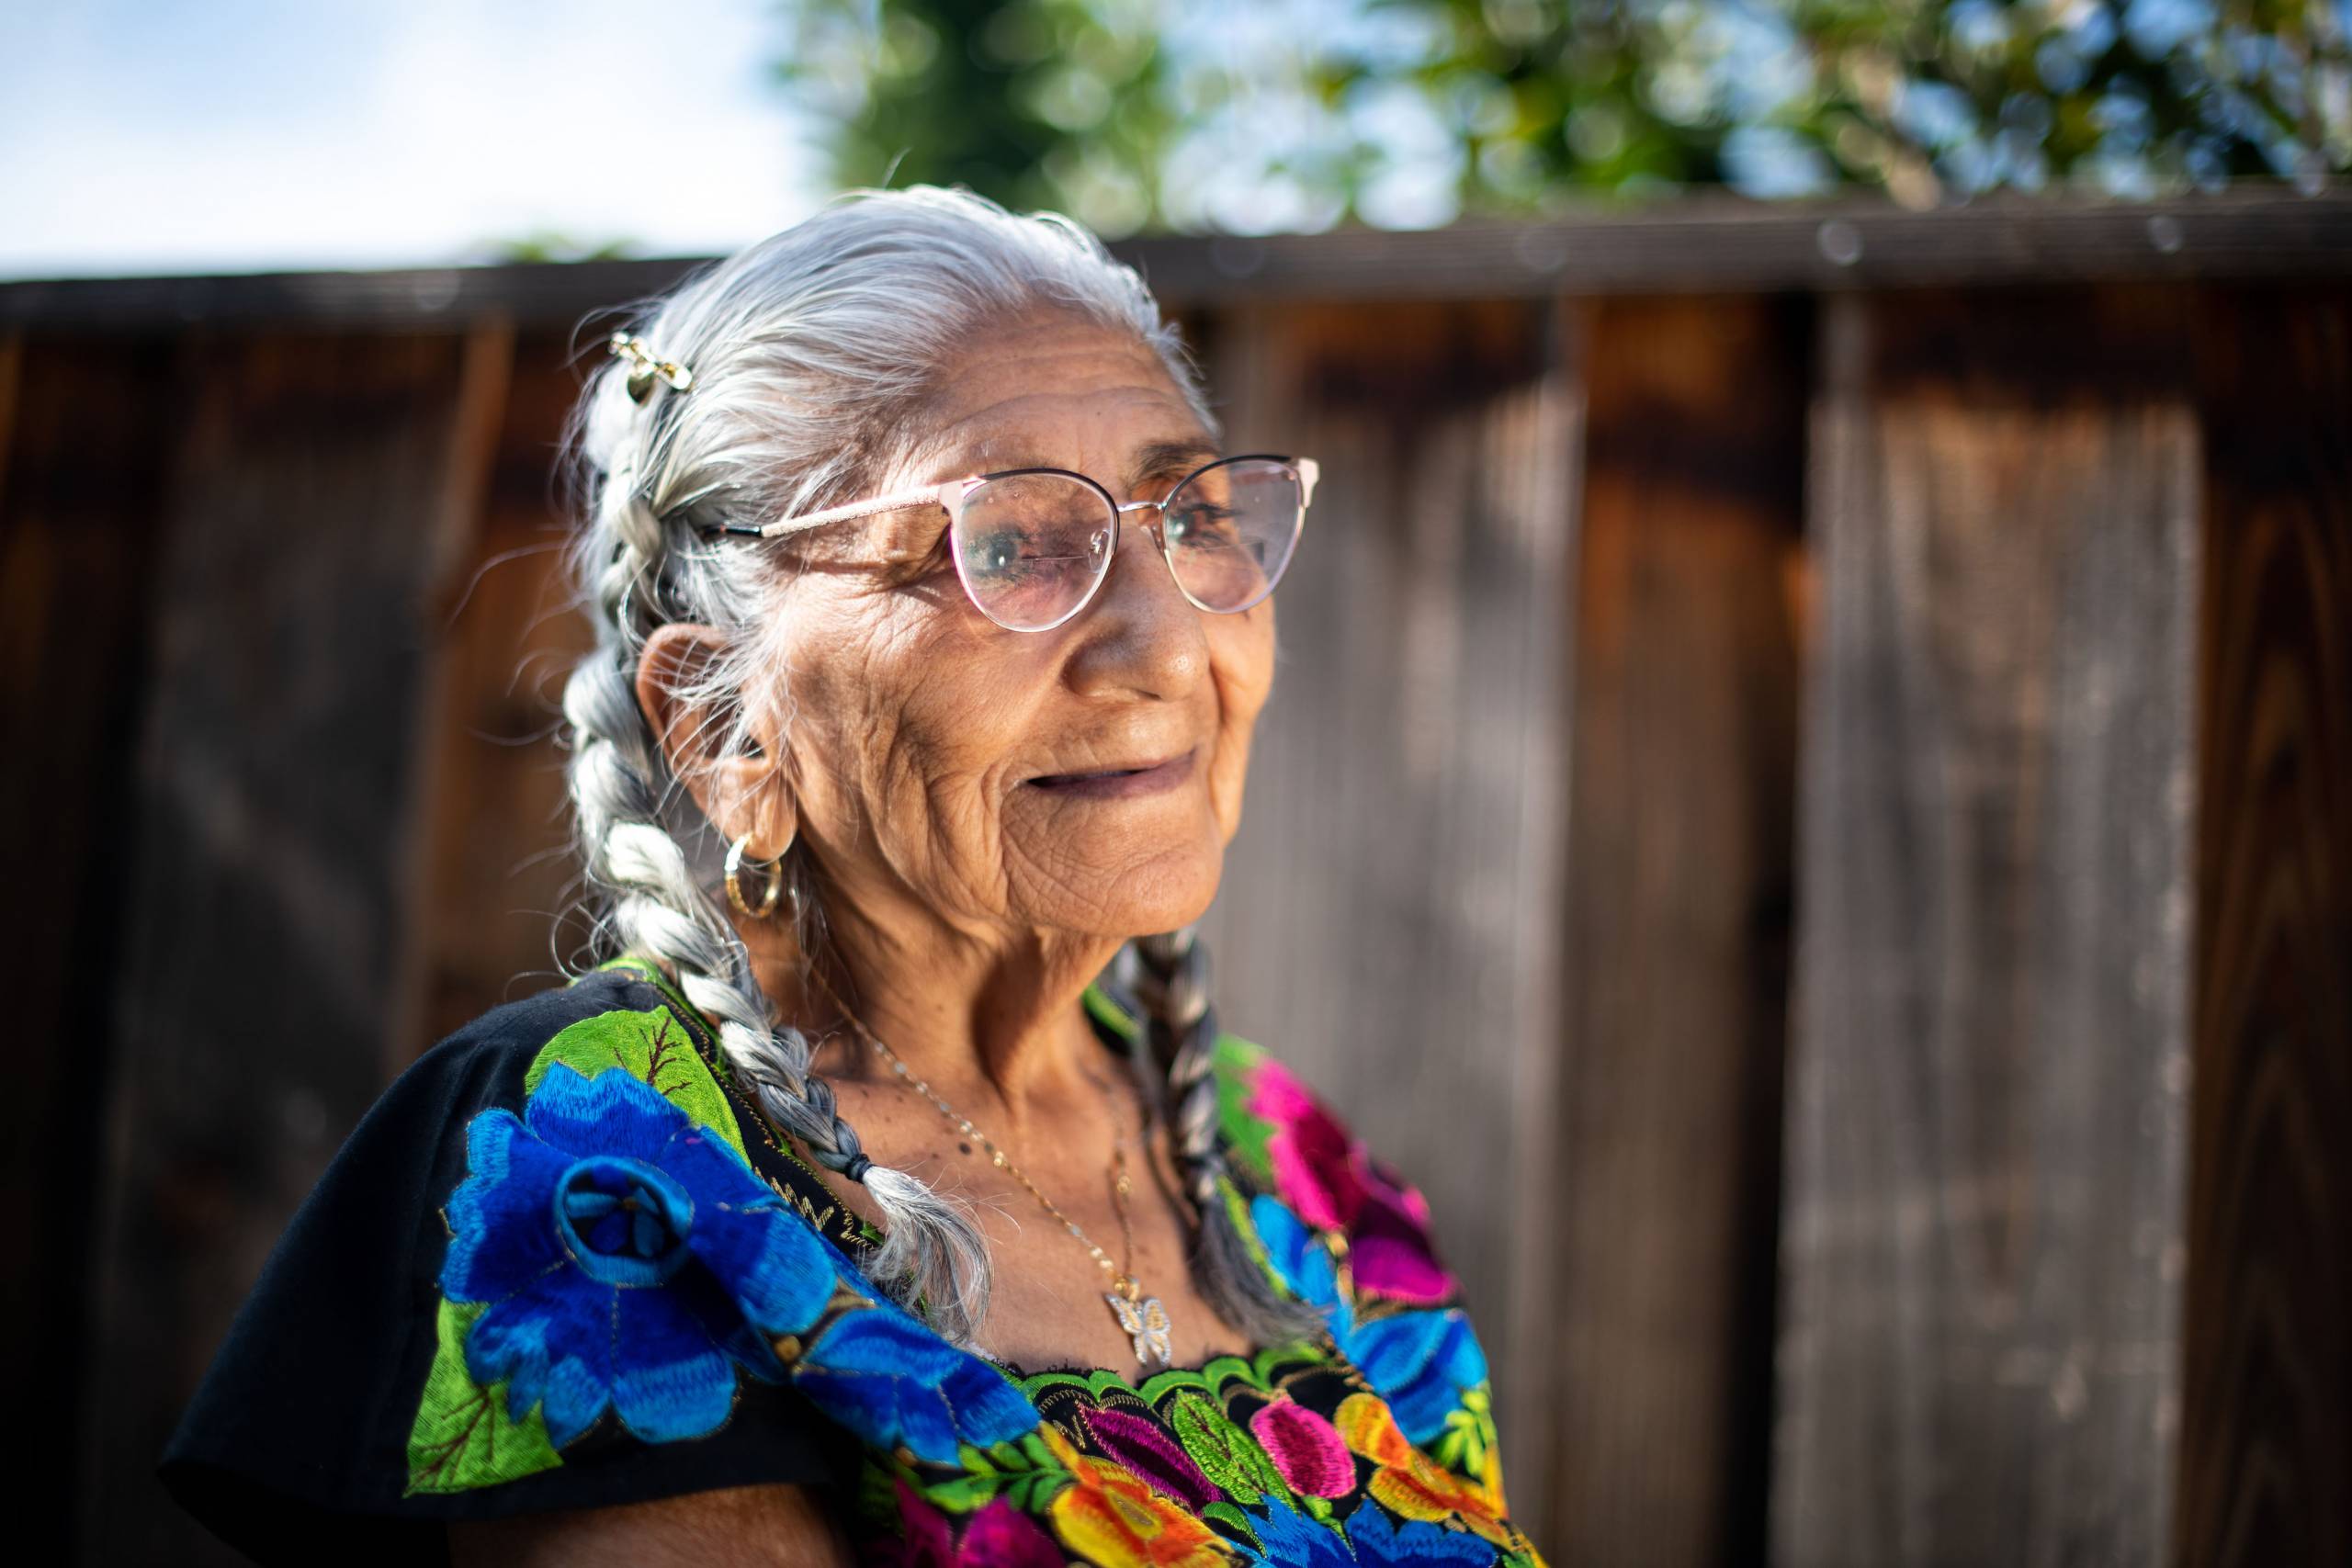 An elderly woman with glasses looks off into the distance.